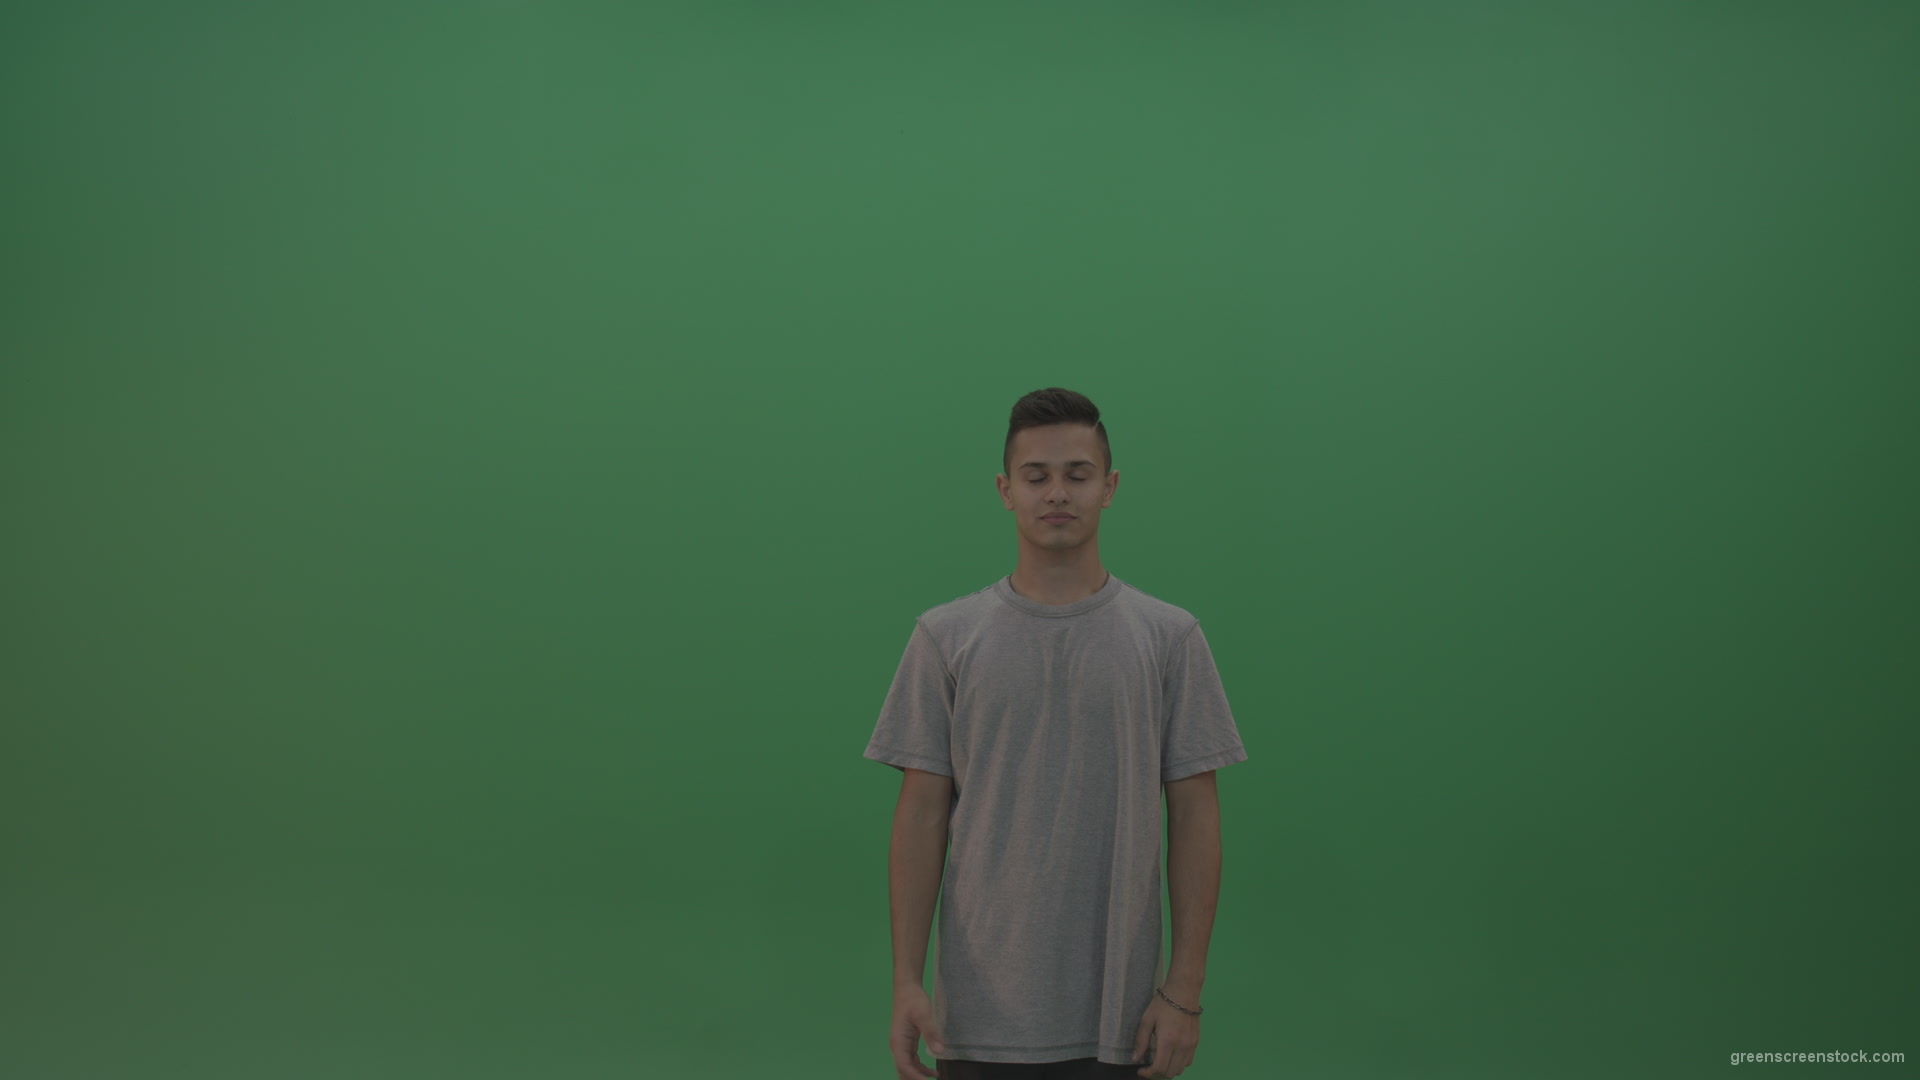 Boy-in-grey-wear-expresses-approval-by-giving-thumbs-up-over-green-screen-background_002 Green Screen Stock